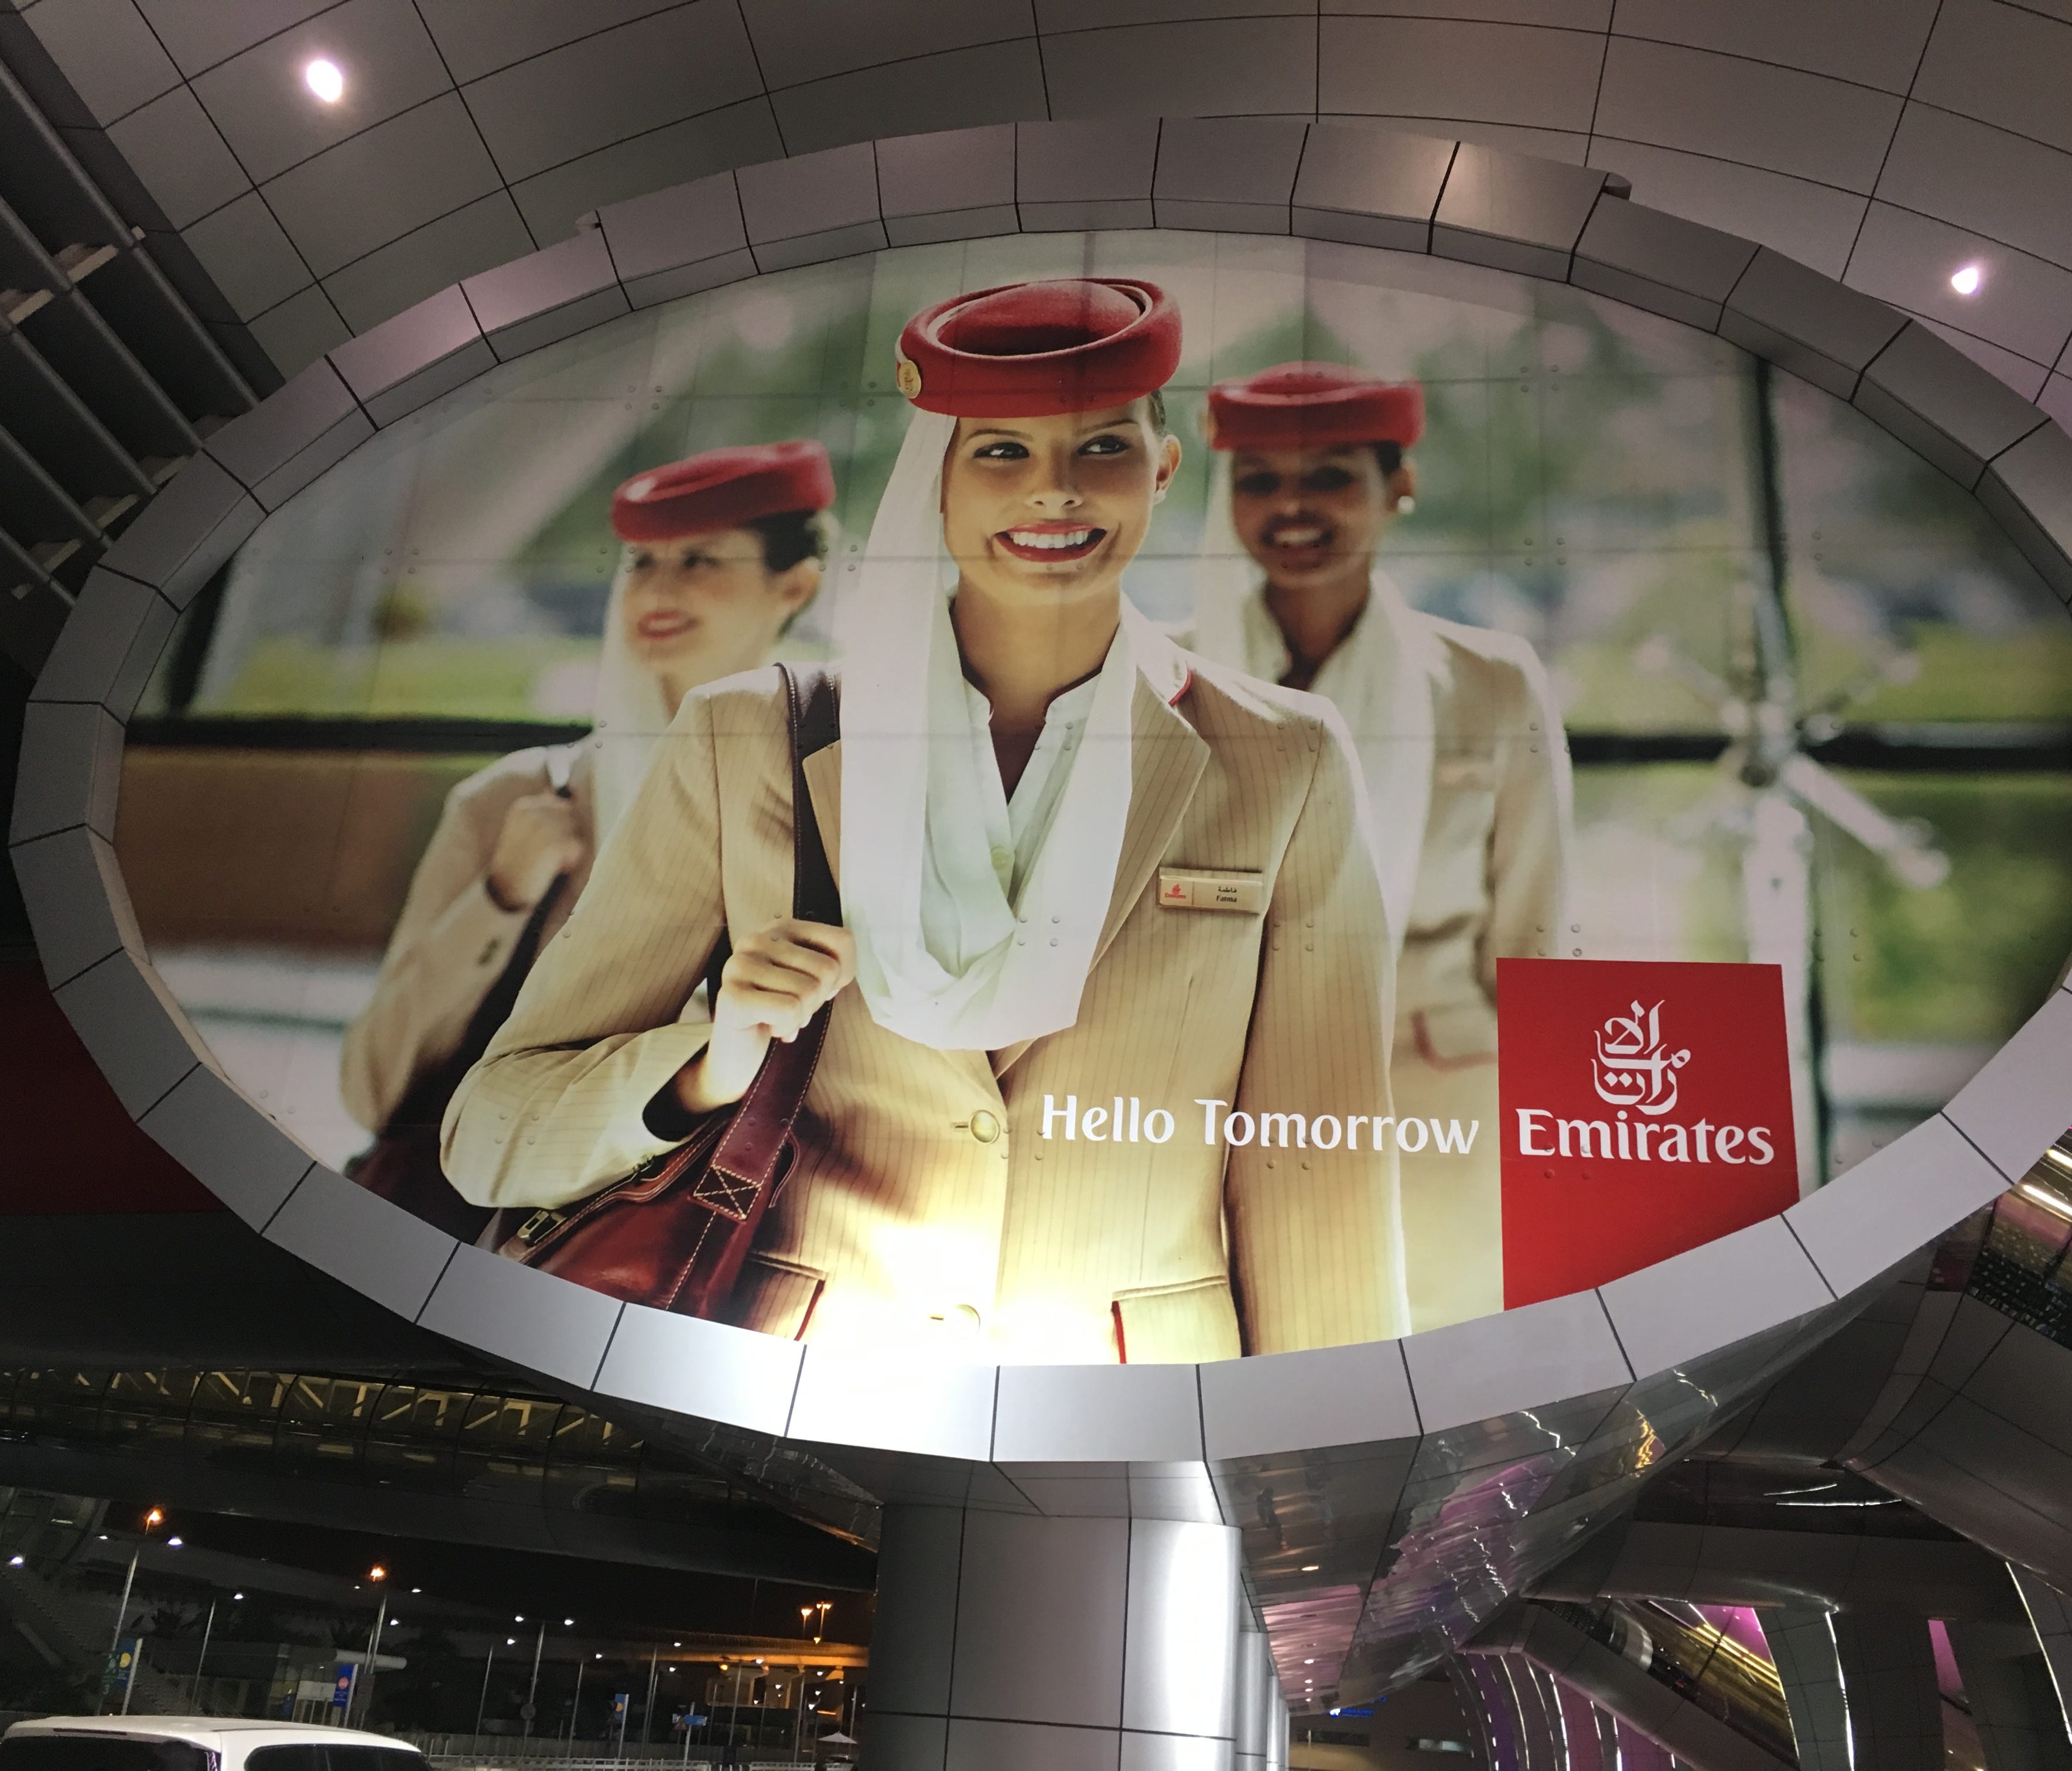 Branding for Emirates airline is seen at the Dubai International Airport in the United Arab Emirates on April 19, 2016.